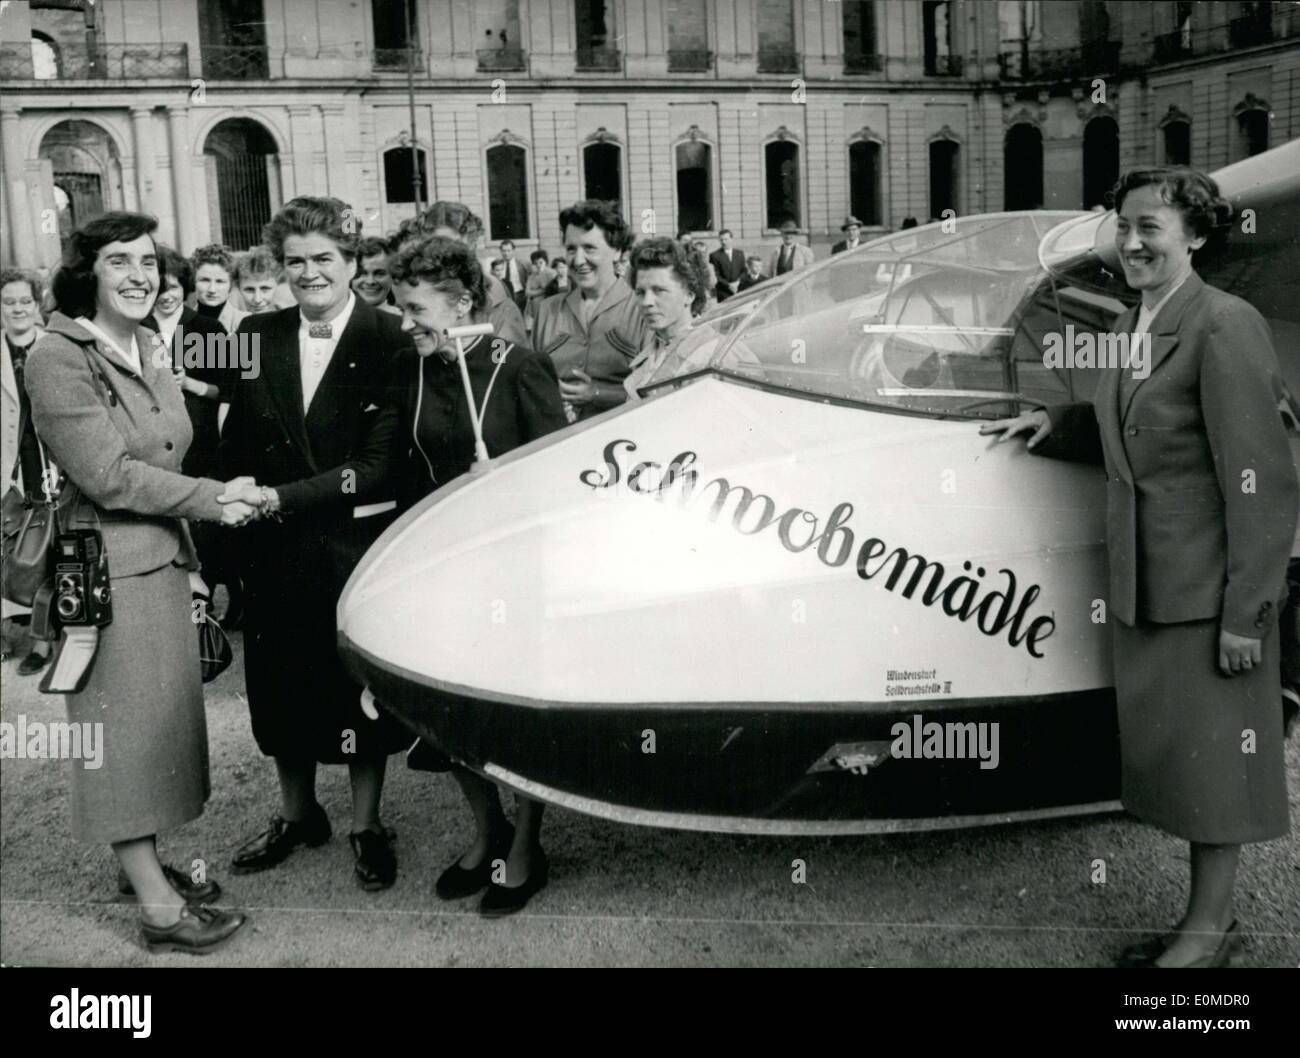 Oct. 25, 1954 - Pictured is the ''Schwobemaedle,'' the first machine of the Stuttgart Glider Pilot Club, which celebrated its 10th anniversary. Pictured on the right is Hanna Reitsch and on the left is American Betsy Woodwords, who held the record for glider pilots. Stock Photo